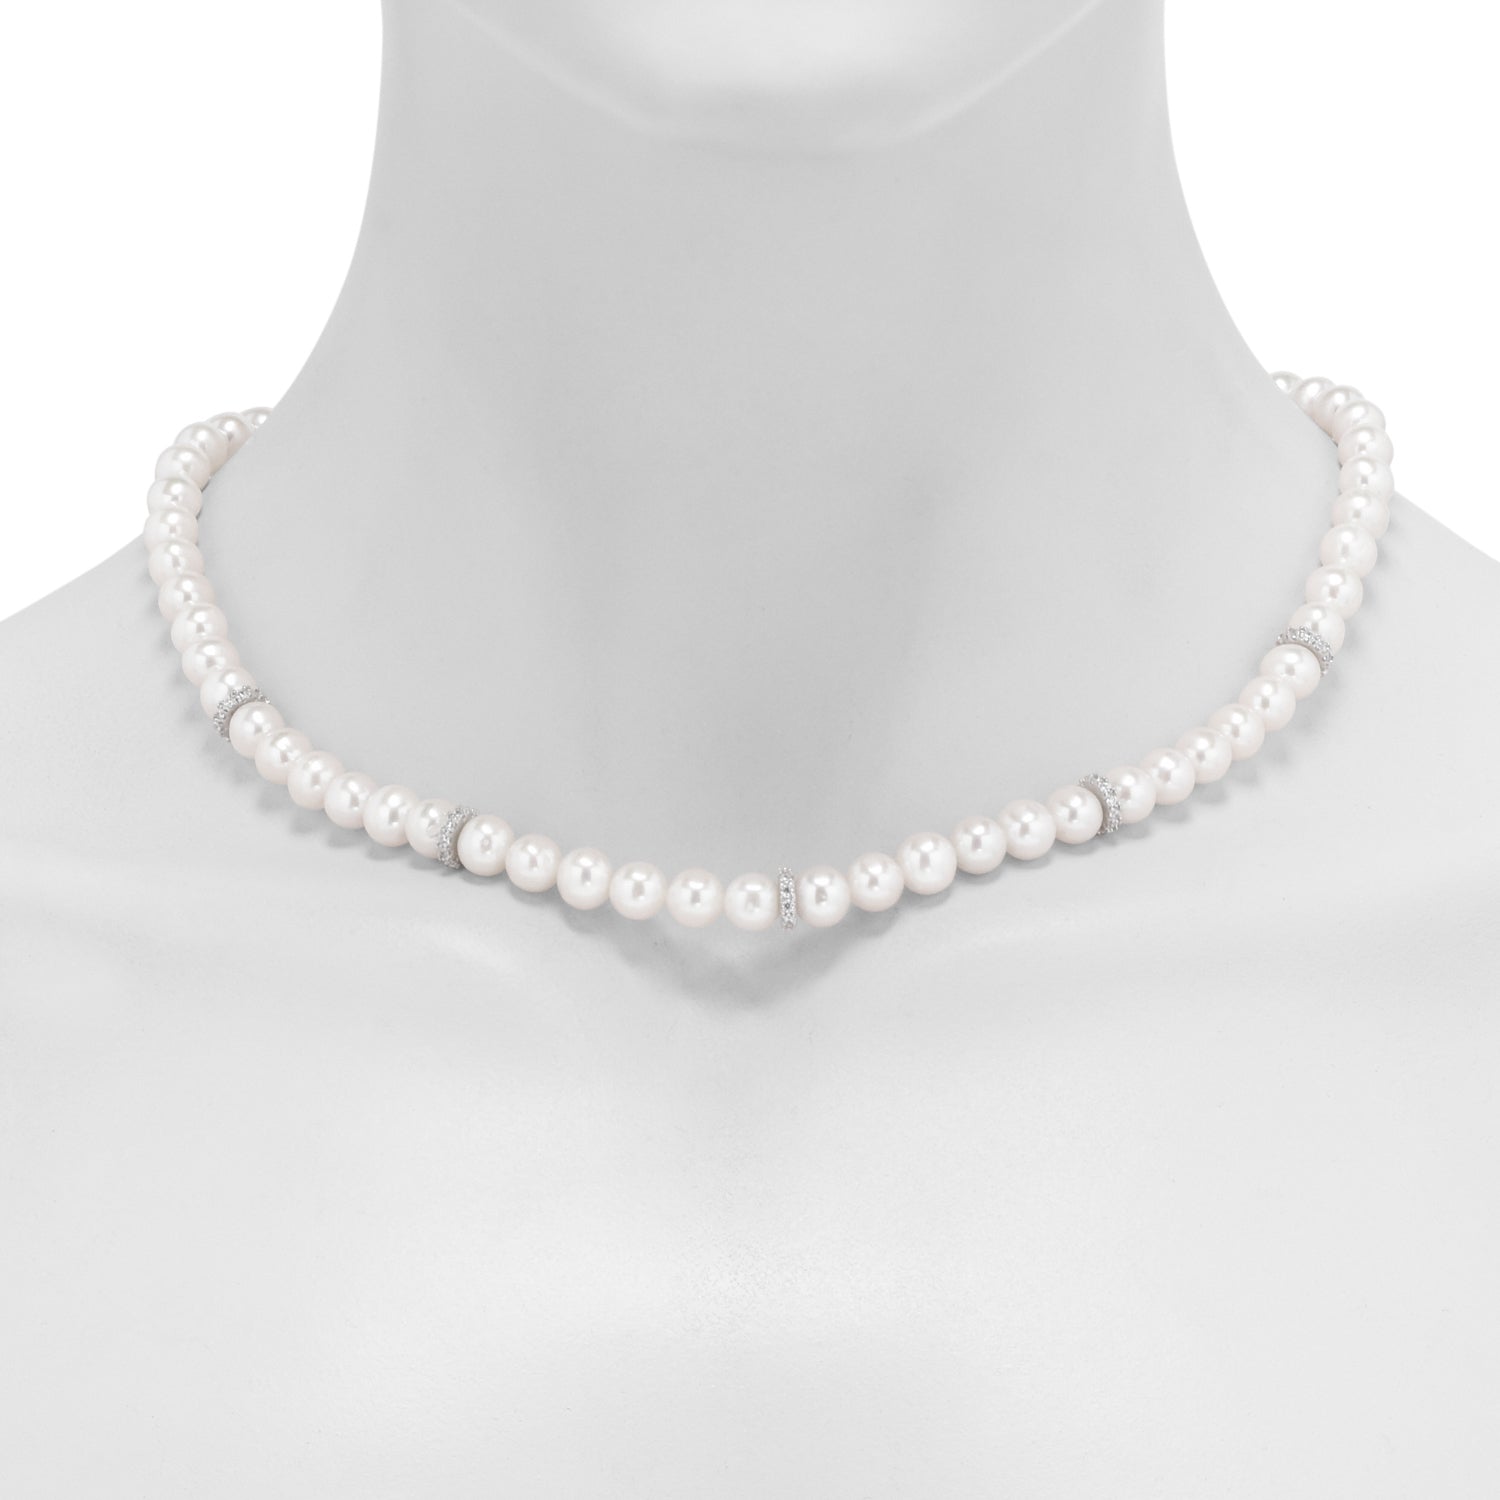 Cultured Freshwater Pearl Necklace in Sterling Silver with Cubic Zirconia (7-8mm pearls)